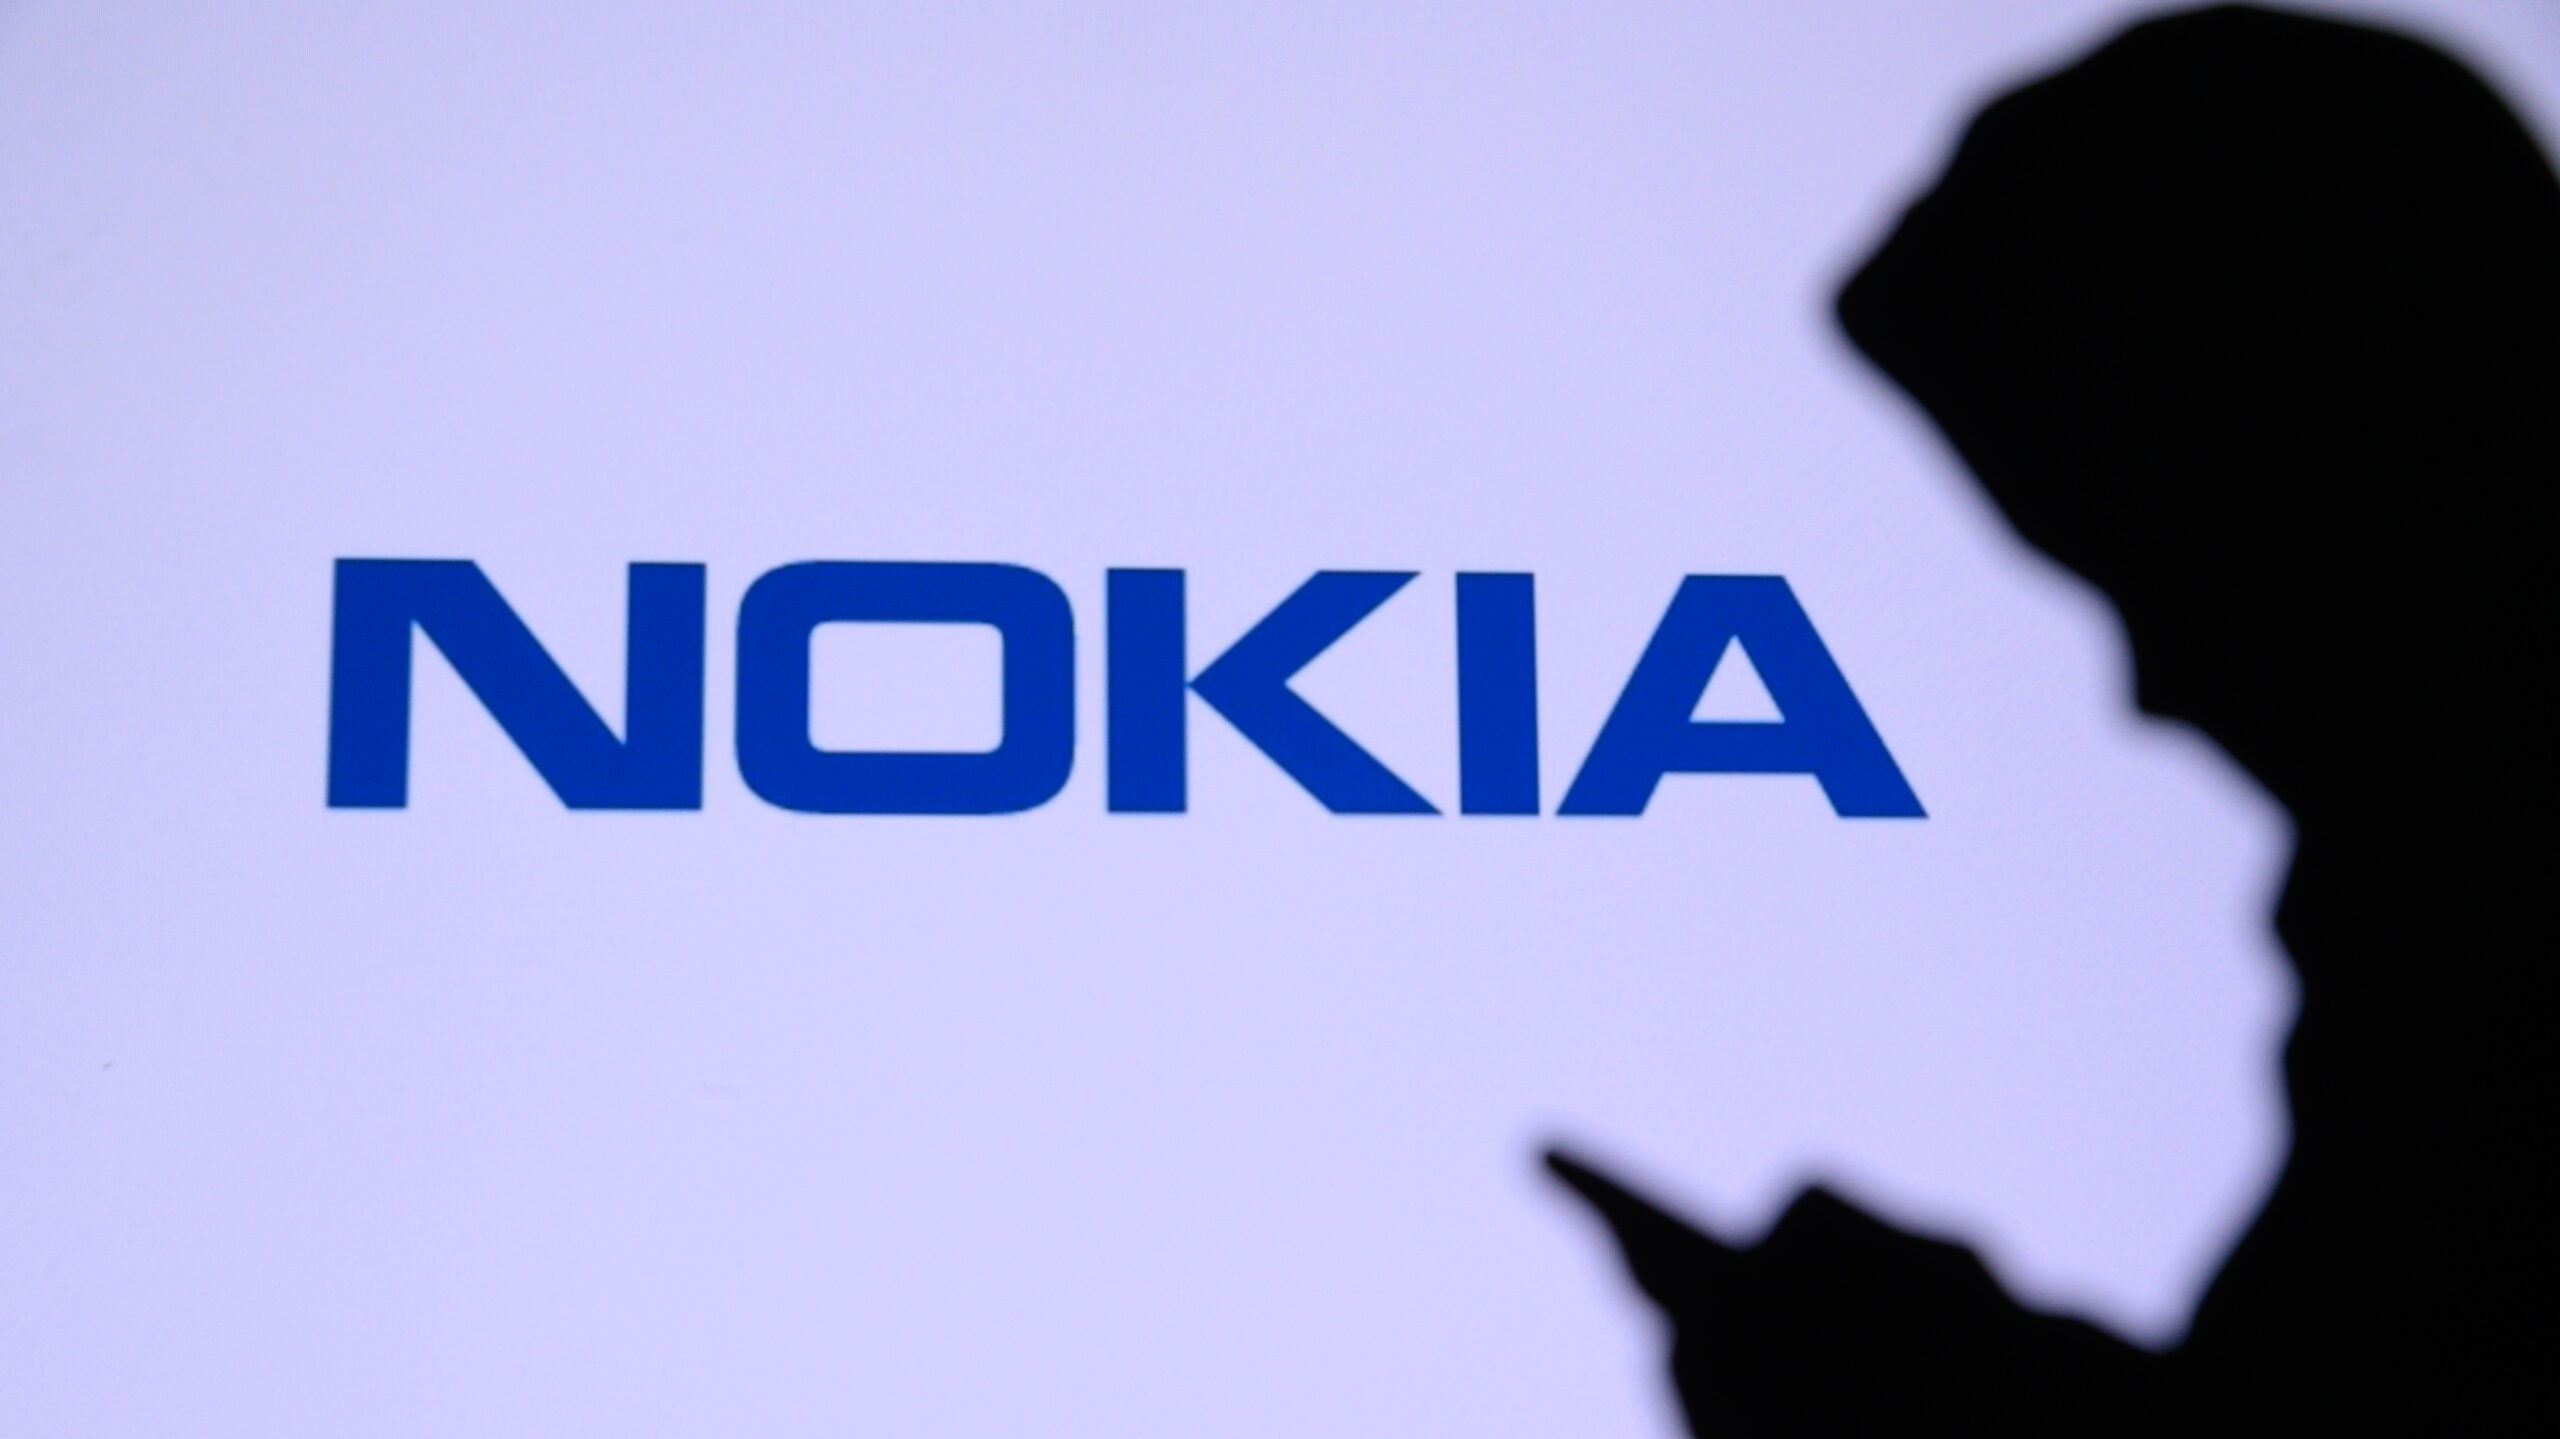 Nokia partners with Canada, Ontario, Ottawa governments to fund 5G research hub